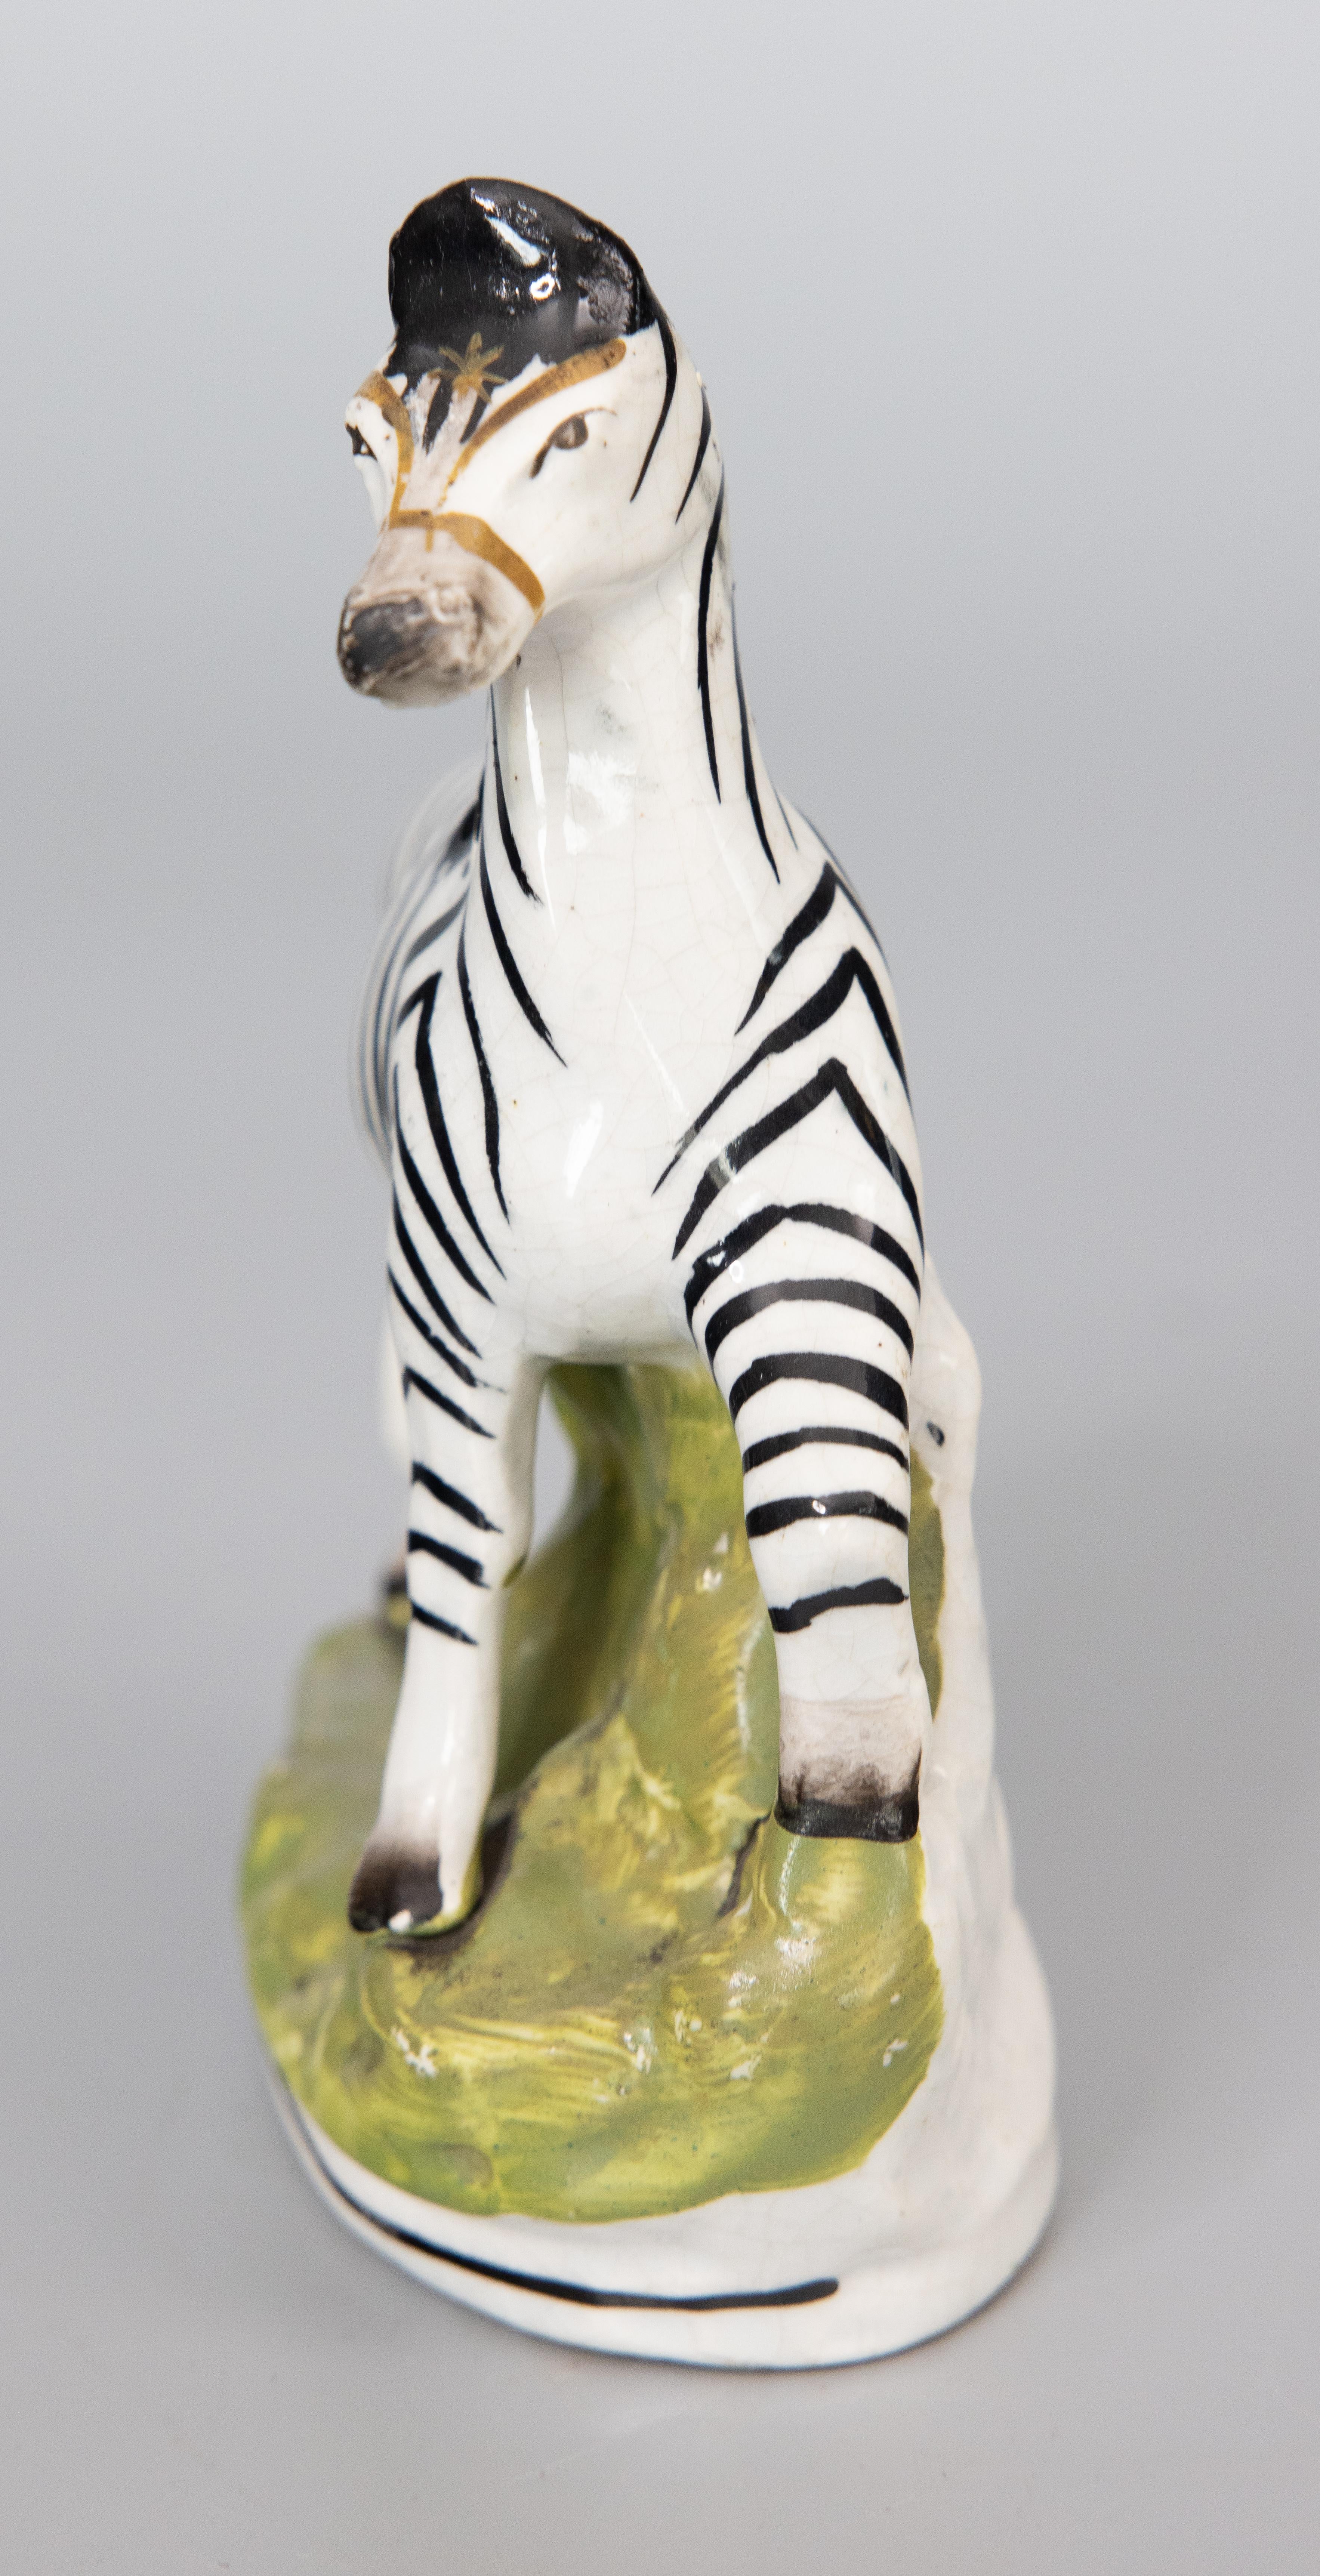 A superb 19th-Century English Staffordshire prancing zebra figurine. This charming zebra is hand painted with fine details and would be perfect for display or added to a collection.

DIMENSIONS
5